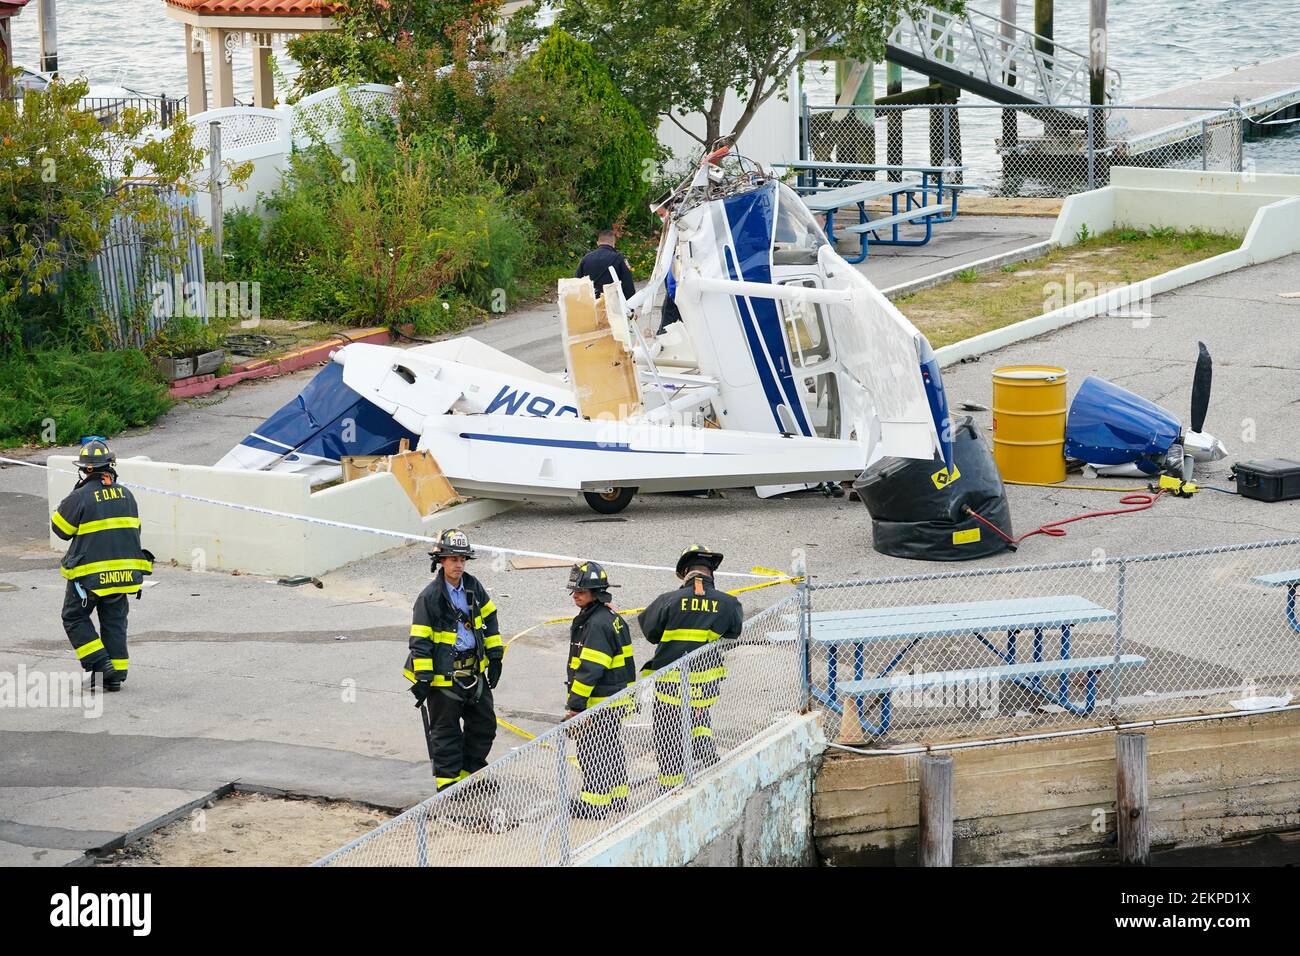 Fdny New York City Fire Department Seen Next To A Small Plane That Crashed Into A Pier Near 3644